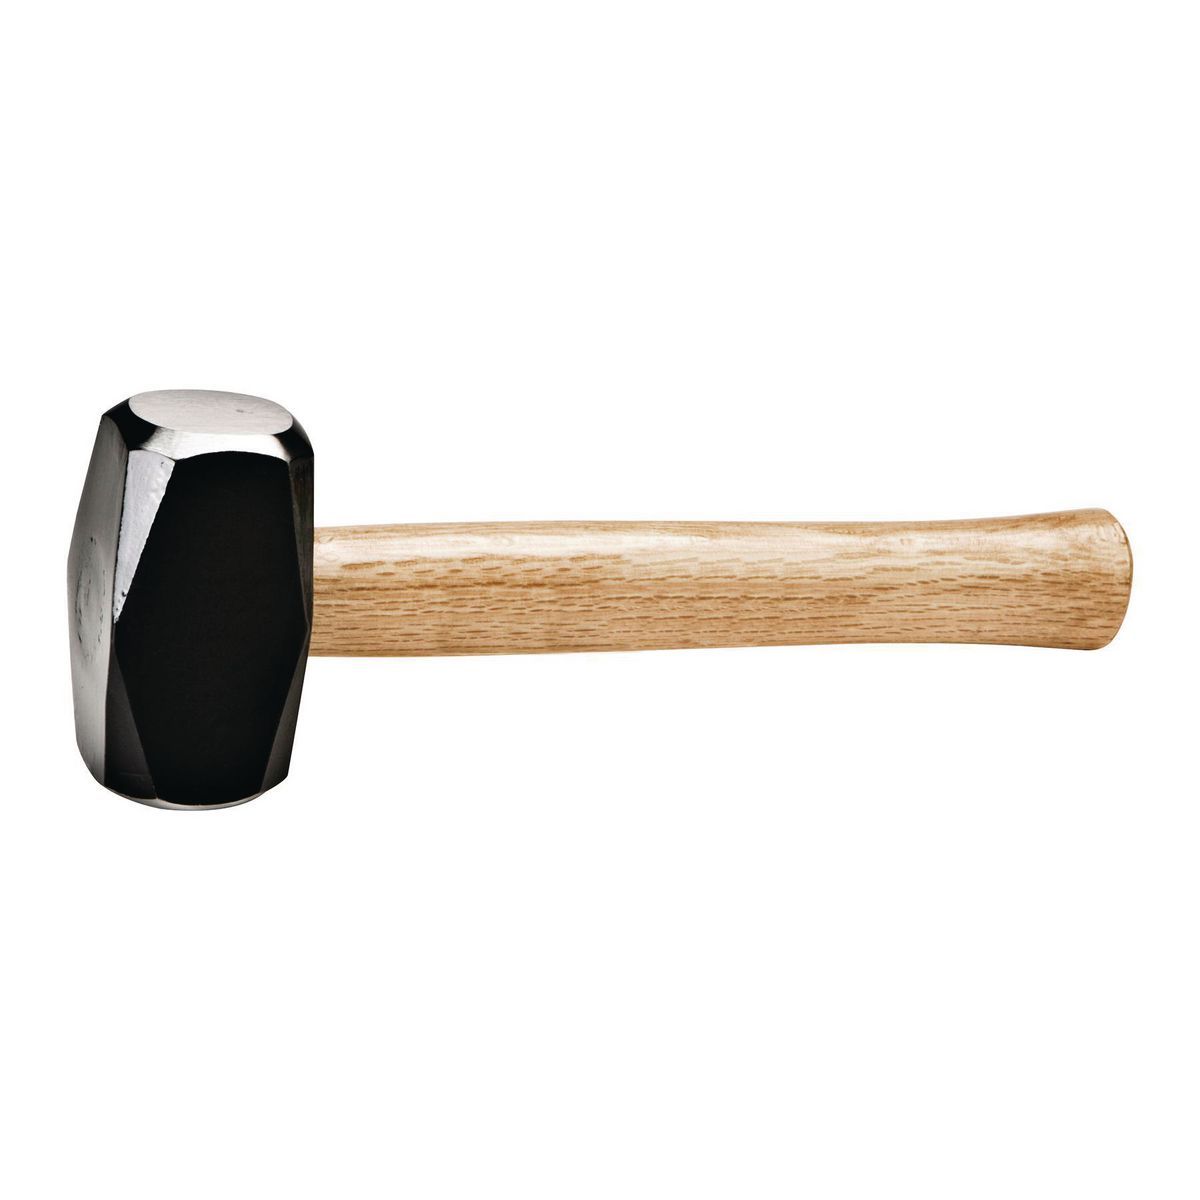 PITTSBURGH 2-1/2 lb. Drilling Hammer with Hardwood Handle